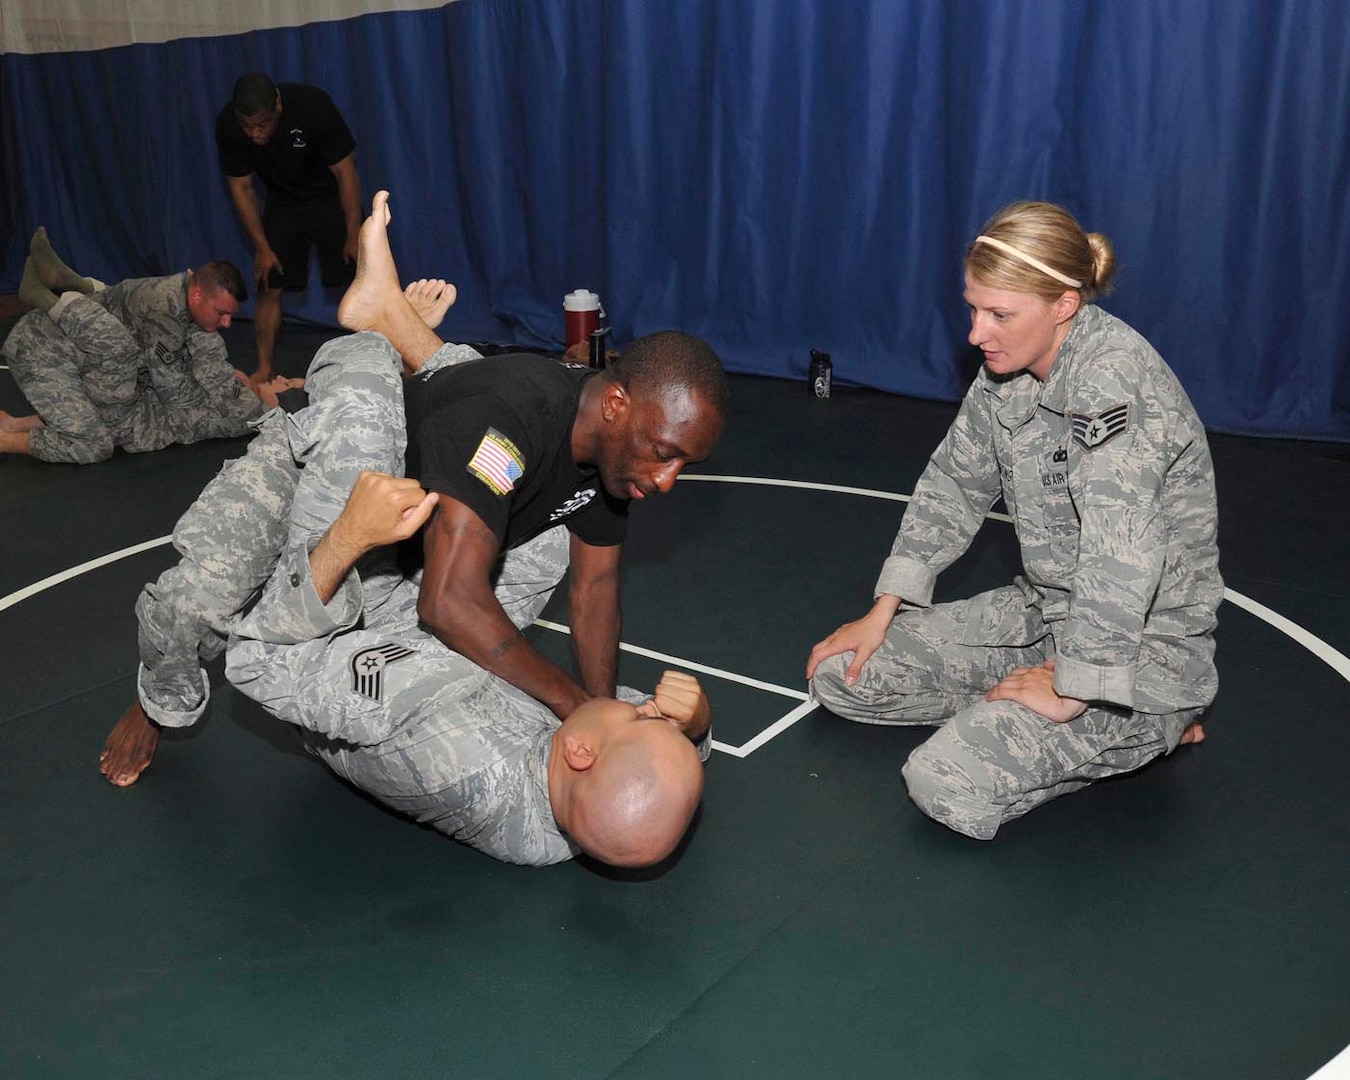 Air Force Staff Sgt. Jesse Armstrong, a security forces technical training instructor with the 343rd Training Squadron, looks on as Army Sgt. 1st Class Jesse Thorton, NCO in charge of the Army III Corps combatives program at Fort Hood, Texas, demonstrates the cross collar choke on Air Force Staff Sgt. Mark Velasquez, technical training instructor with the 343rd TRS, June 12 at the Warhawk Fitness Center. (U.S. Air Force photo/Alan Boedeker)